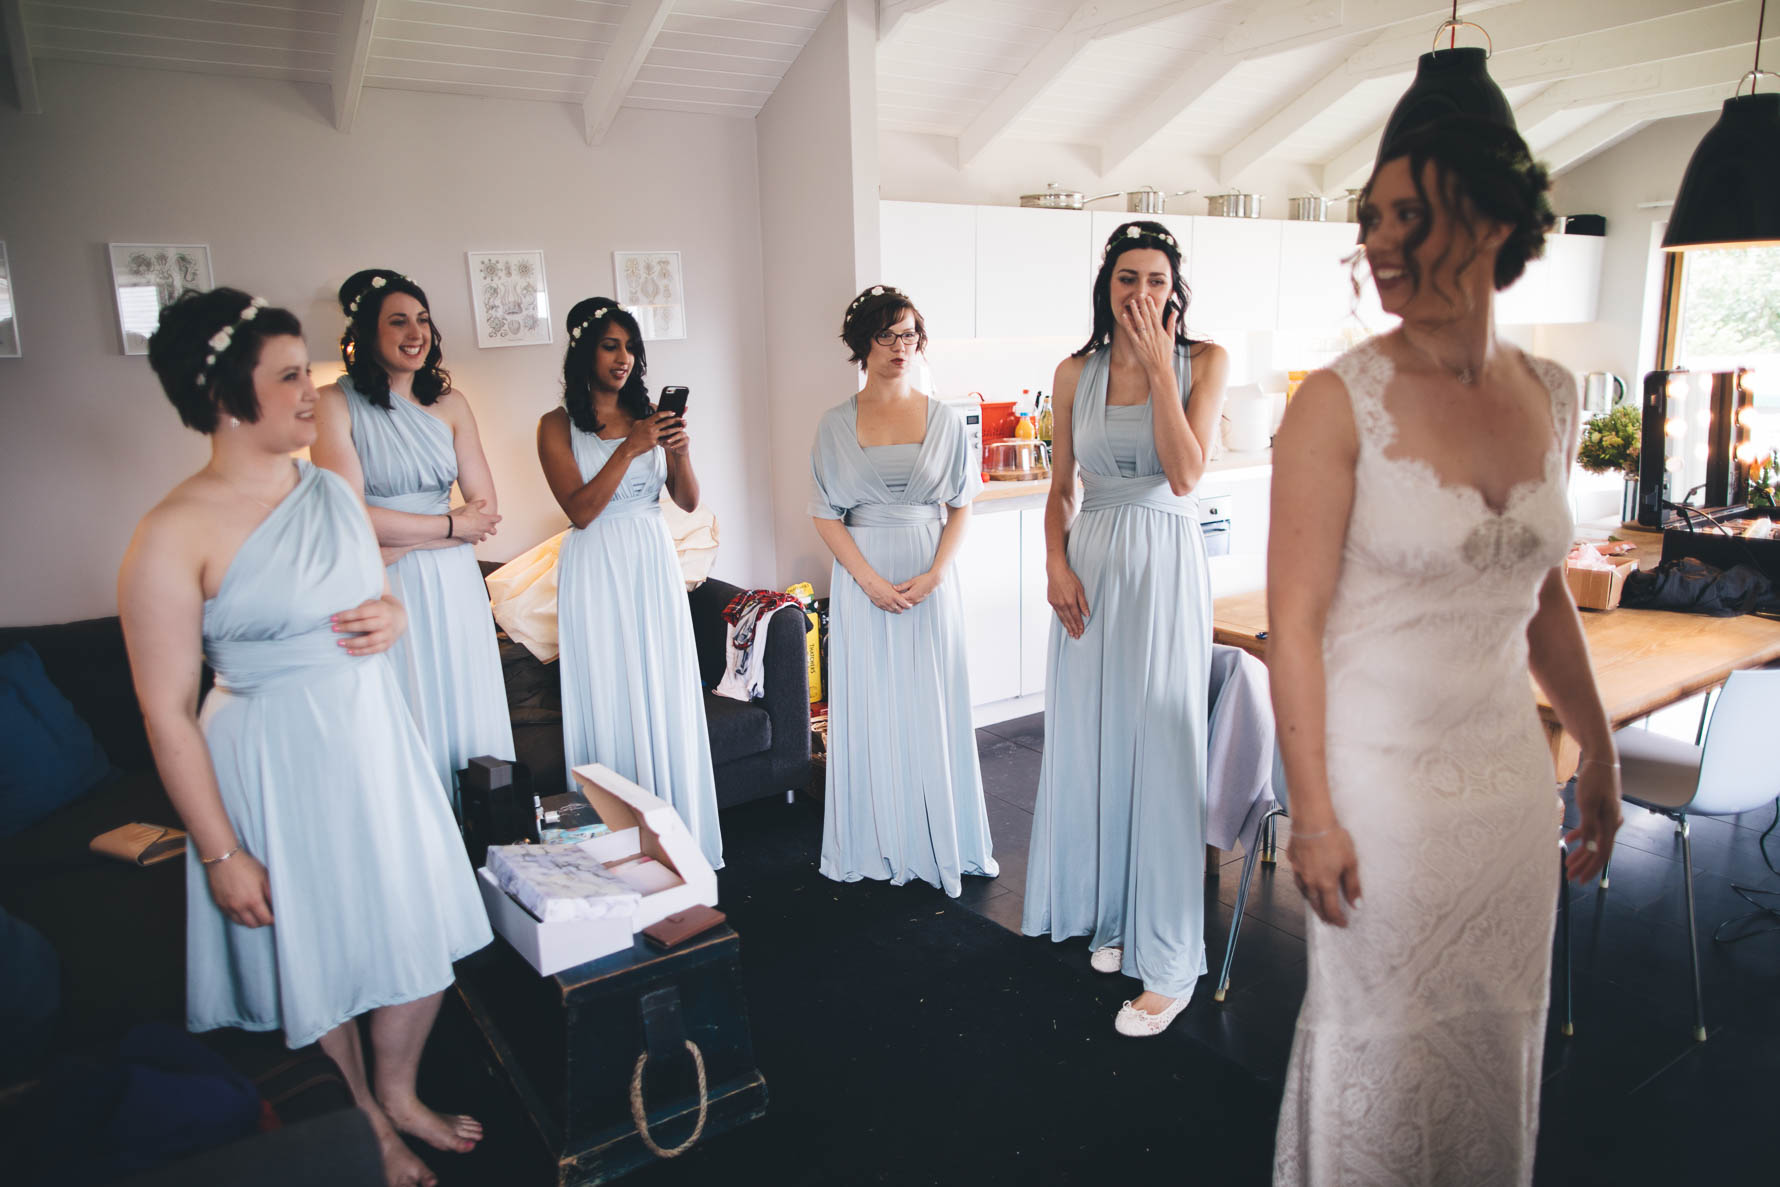 Five bridesmaids in baby blue dresses stood in a semicircle looking towards the bride who has just put her wedding dress on